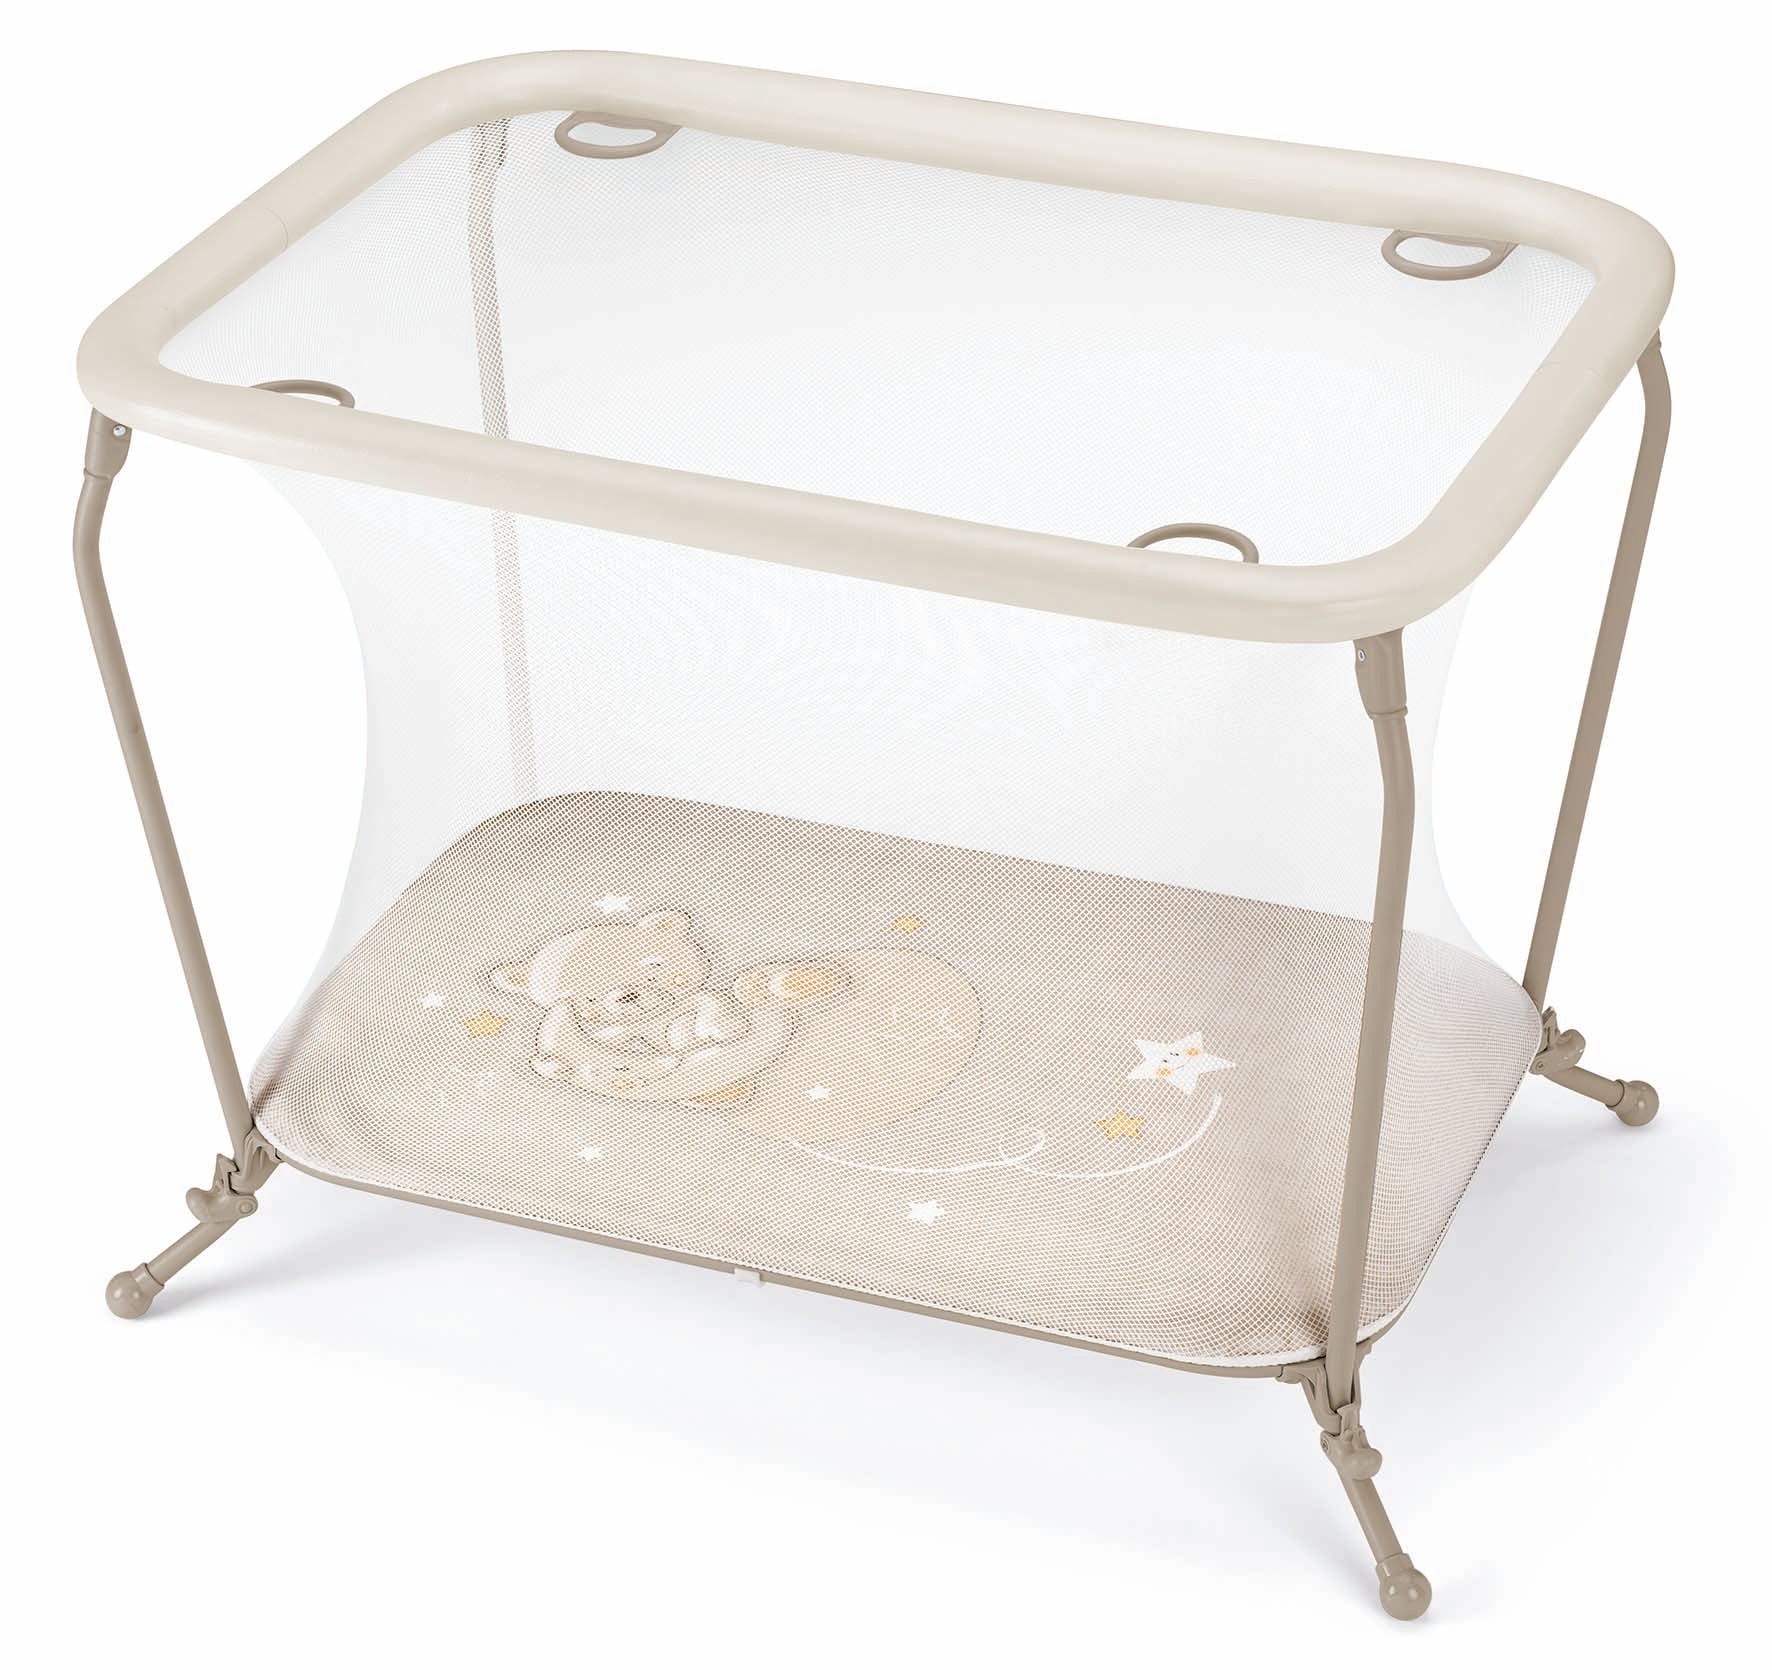 Lusso Playpen in brown - Premium Italian-Made Baby Product Available in South Africa